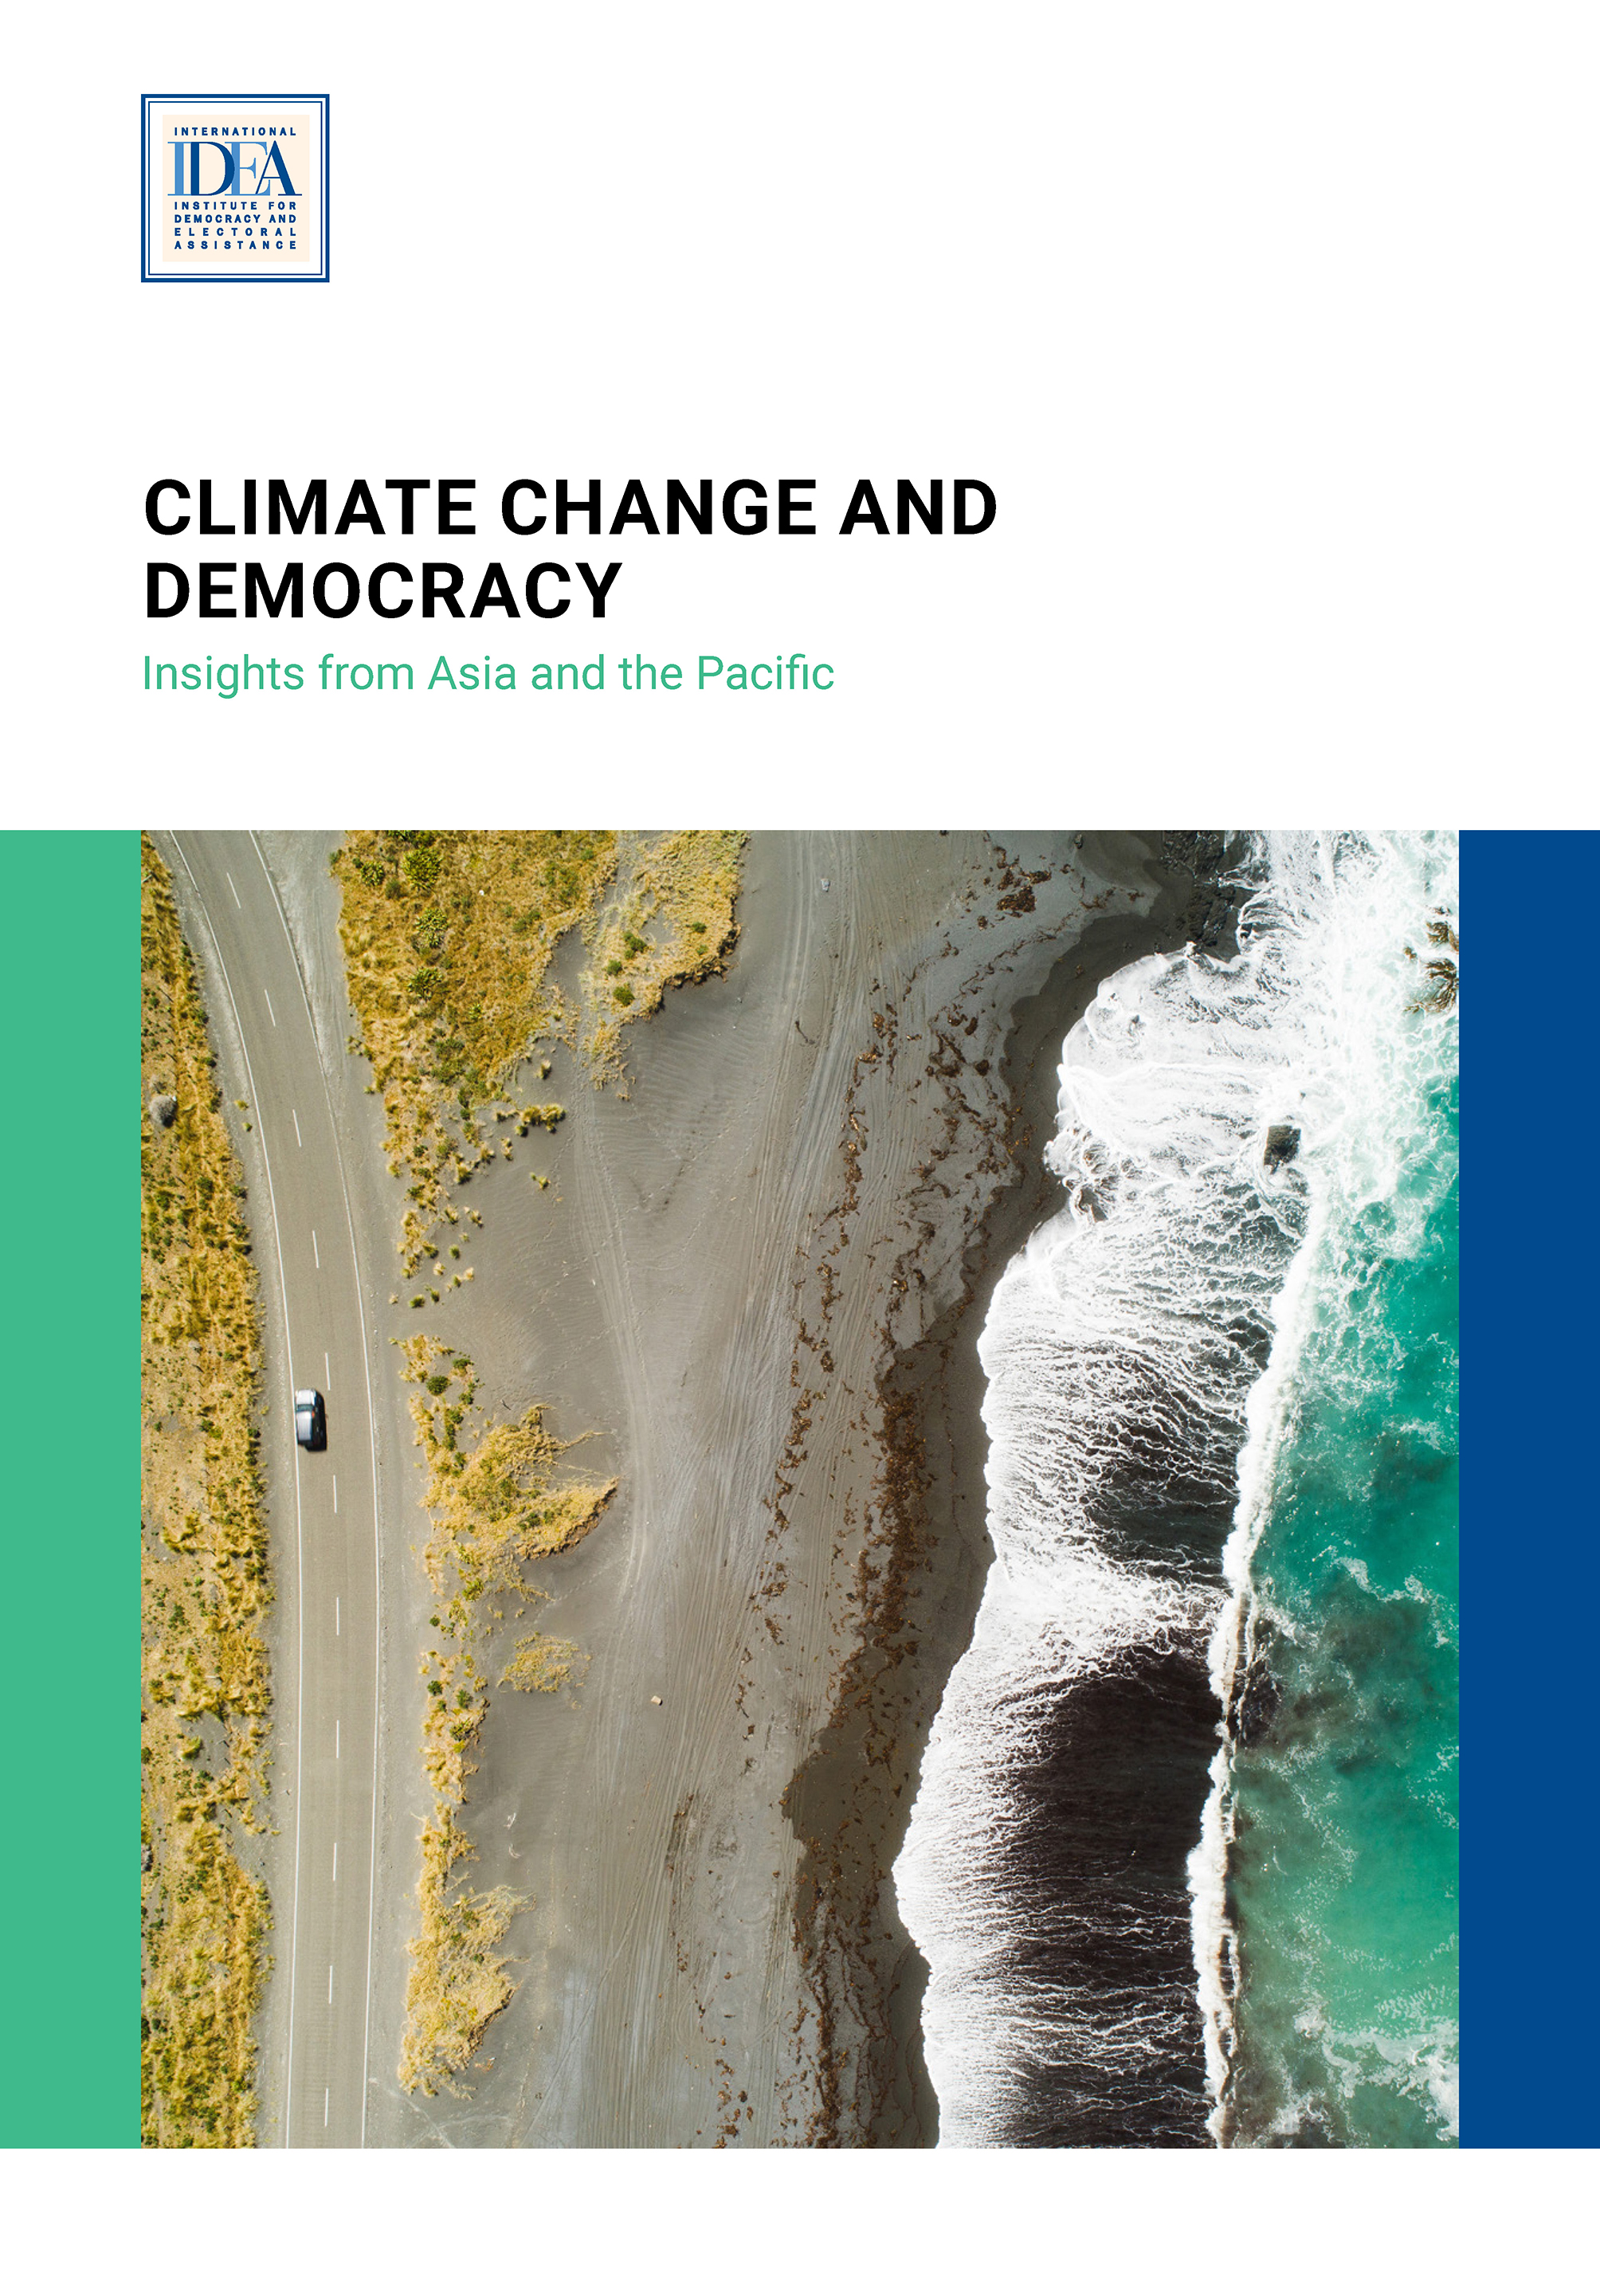 Cover of The Report Climate Change and Democracy: Insights from Asia and the Pacific.